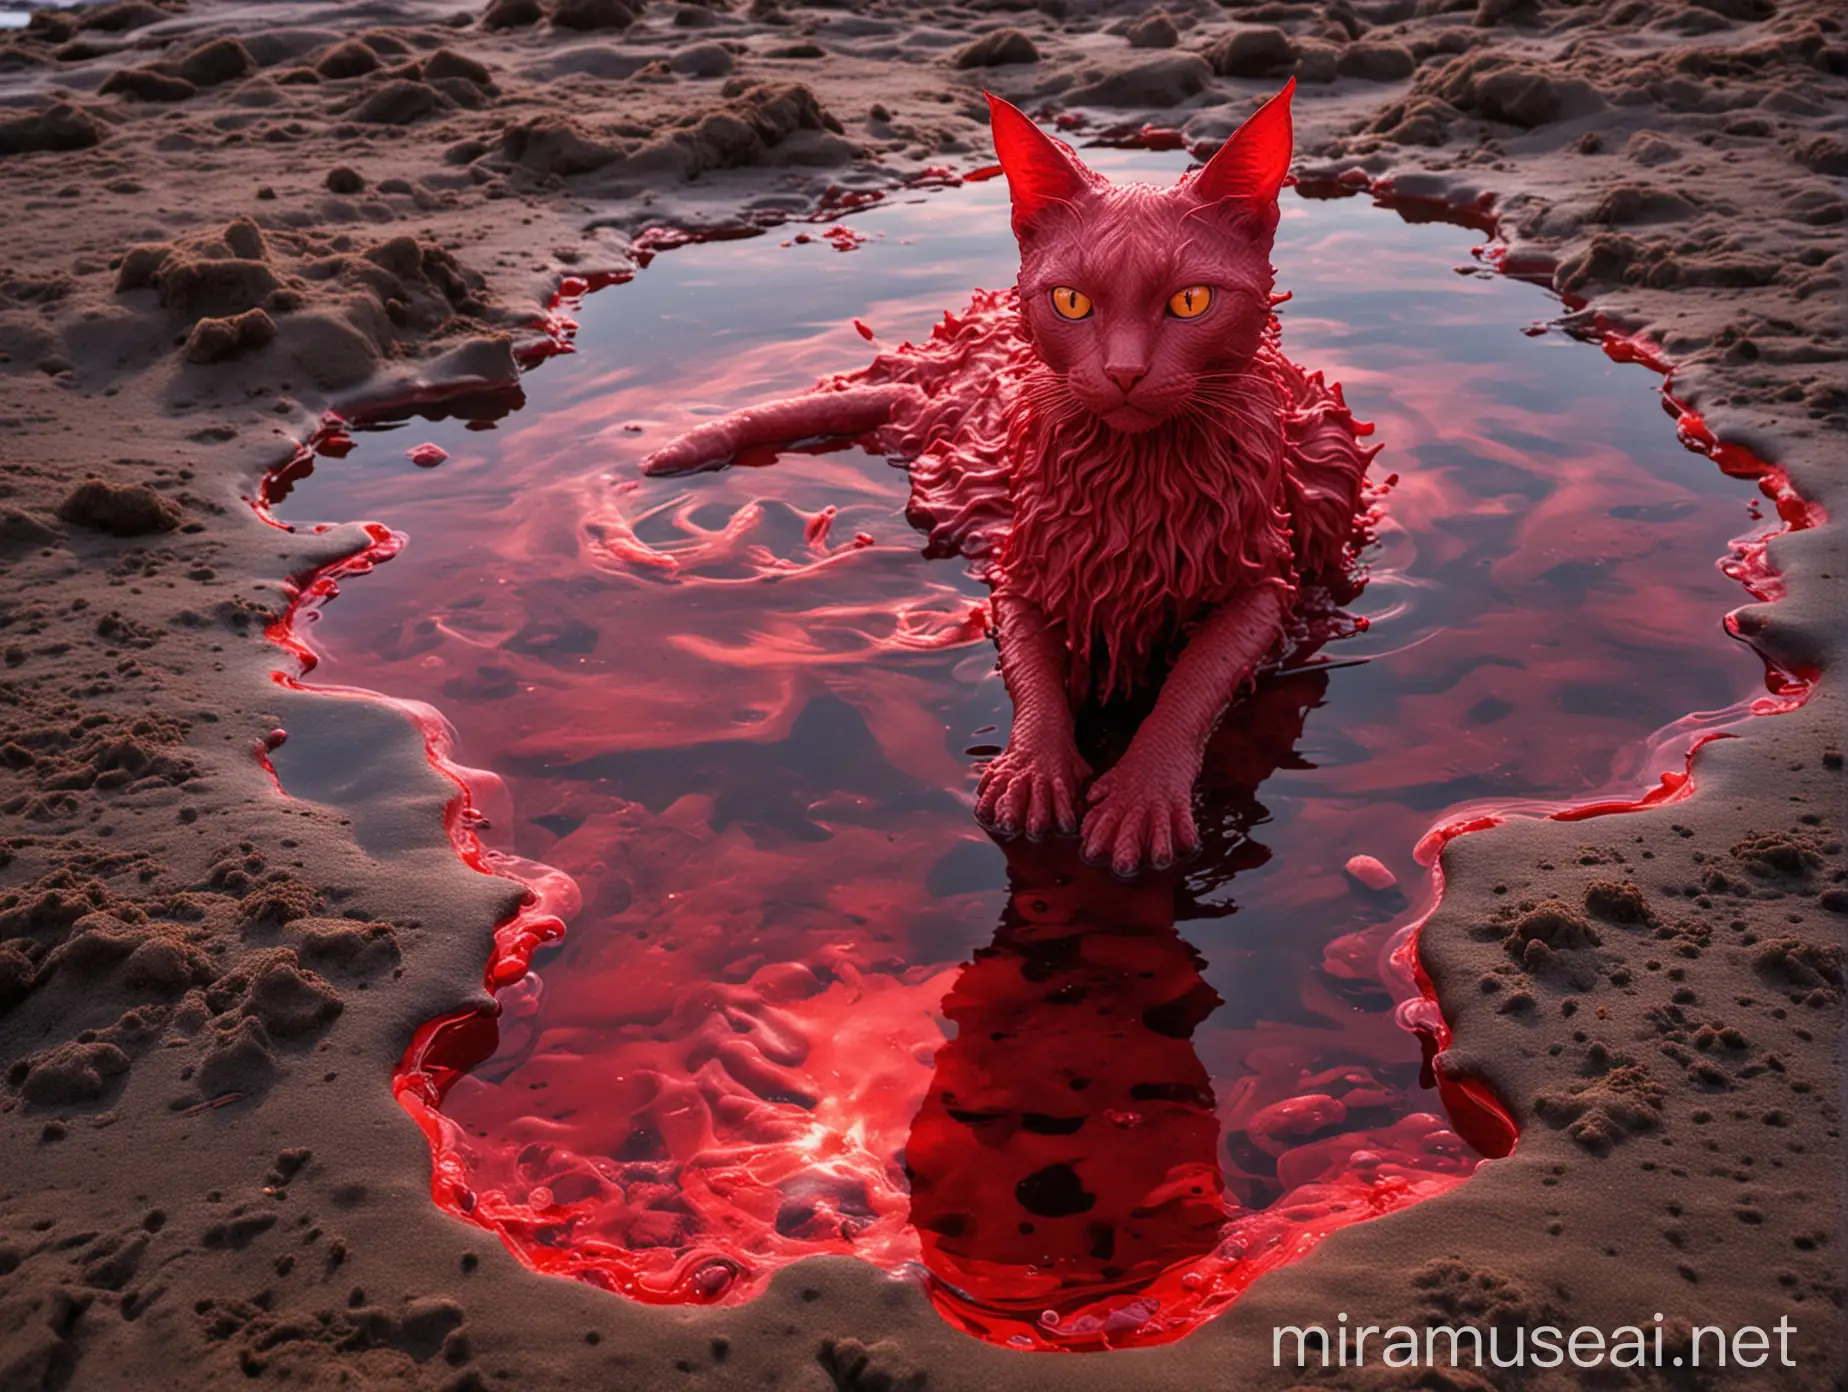 Crimson non-Newtonian tide pools, begin to morph into a cat-like creature. This transformation captures the fluid solidifying into a figure that resembles a person glowing in the same ethereal crimson light.